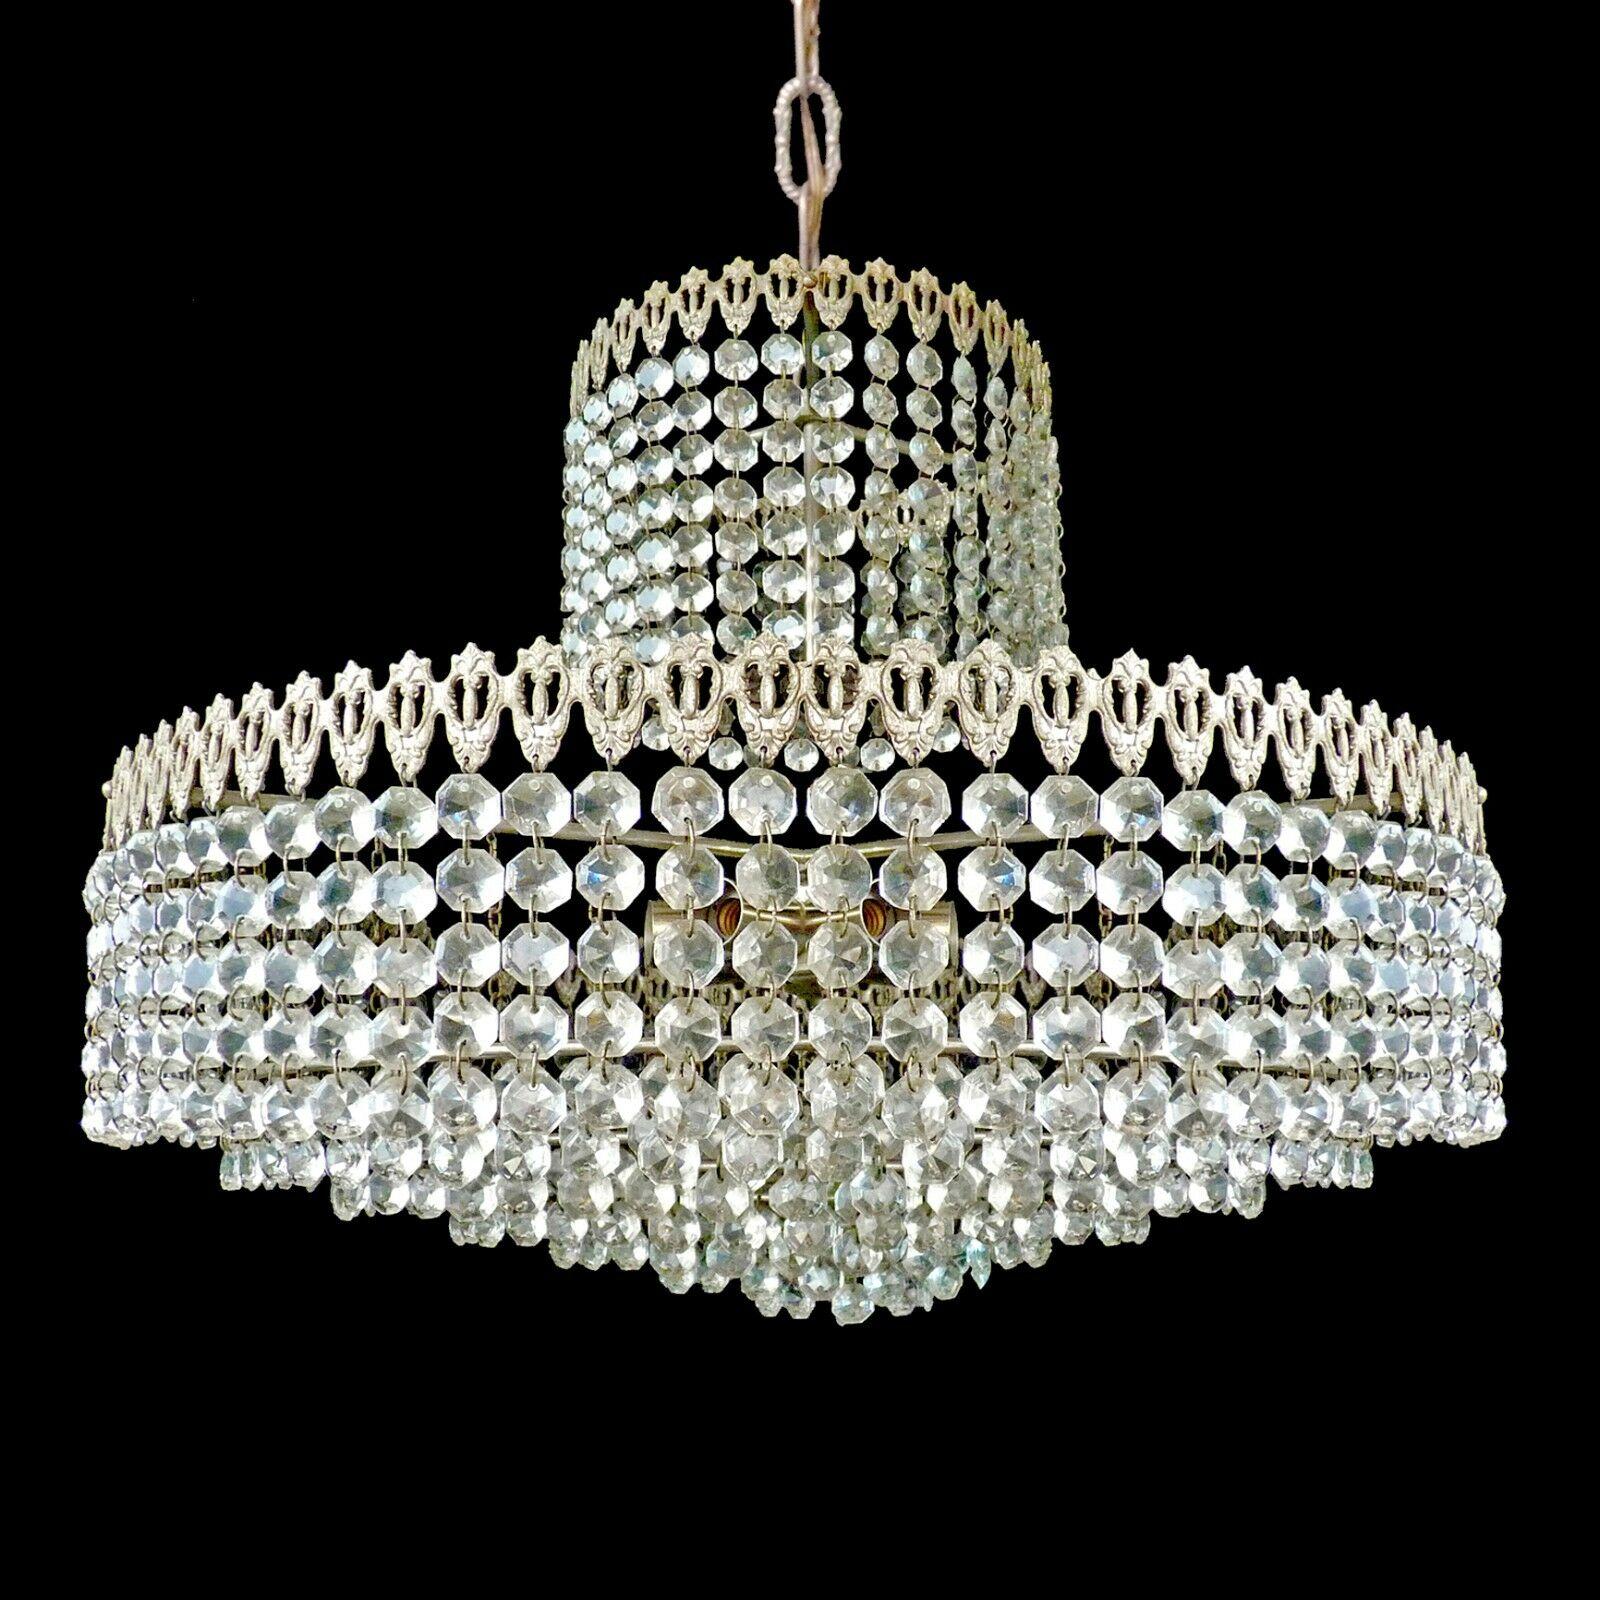 Beaded French Hollywood Regency Chrome Cut Crystal Beads 8tiers Wedding Cake Chandelier For Sale